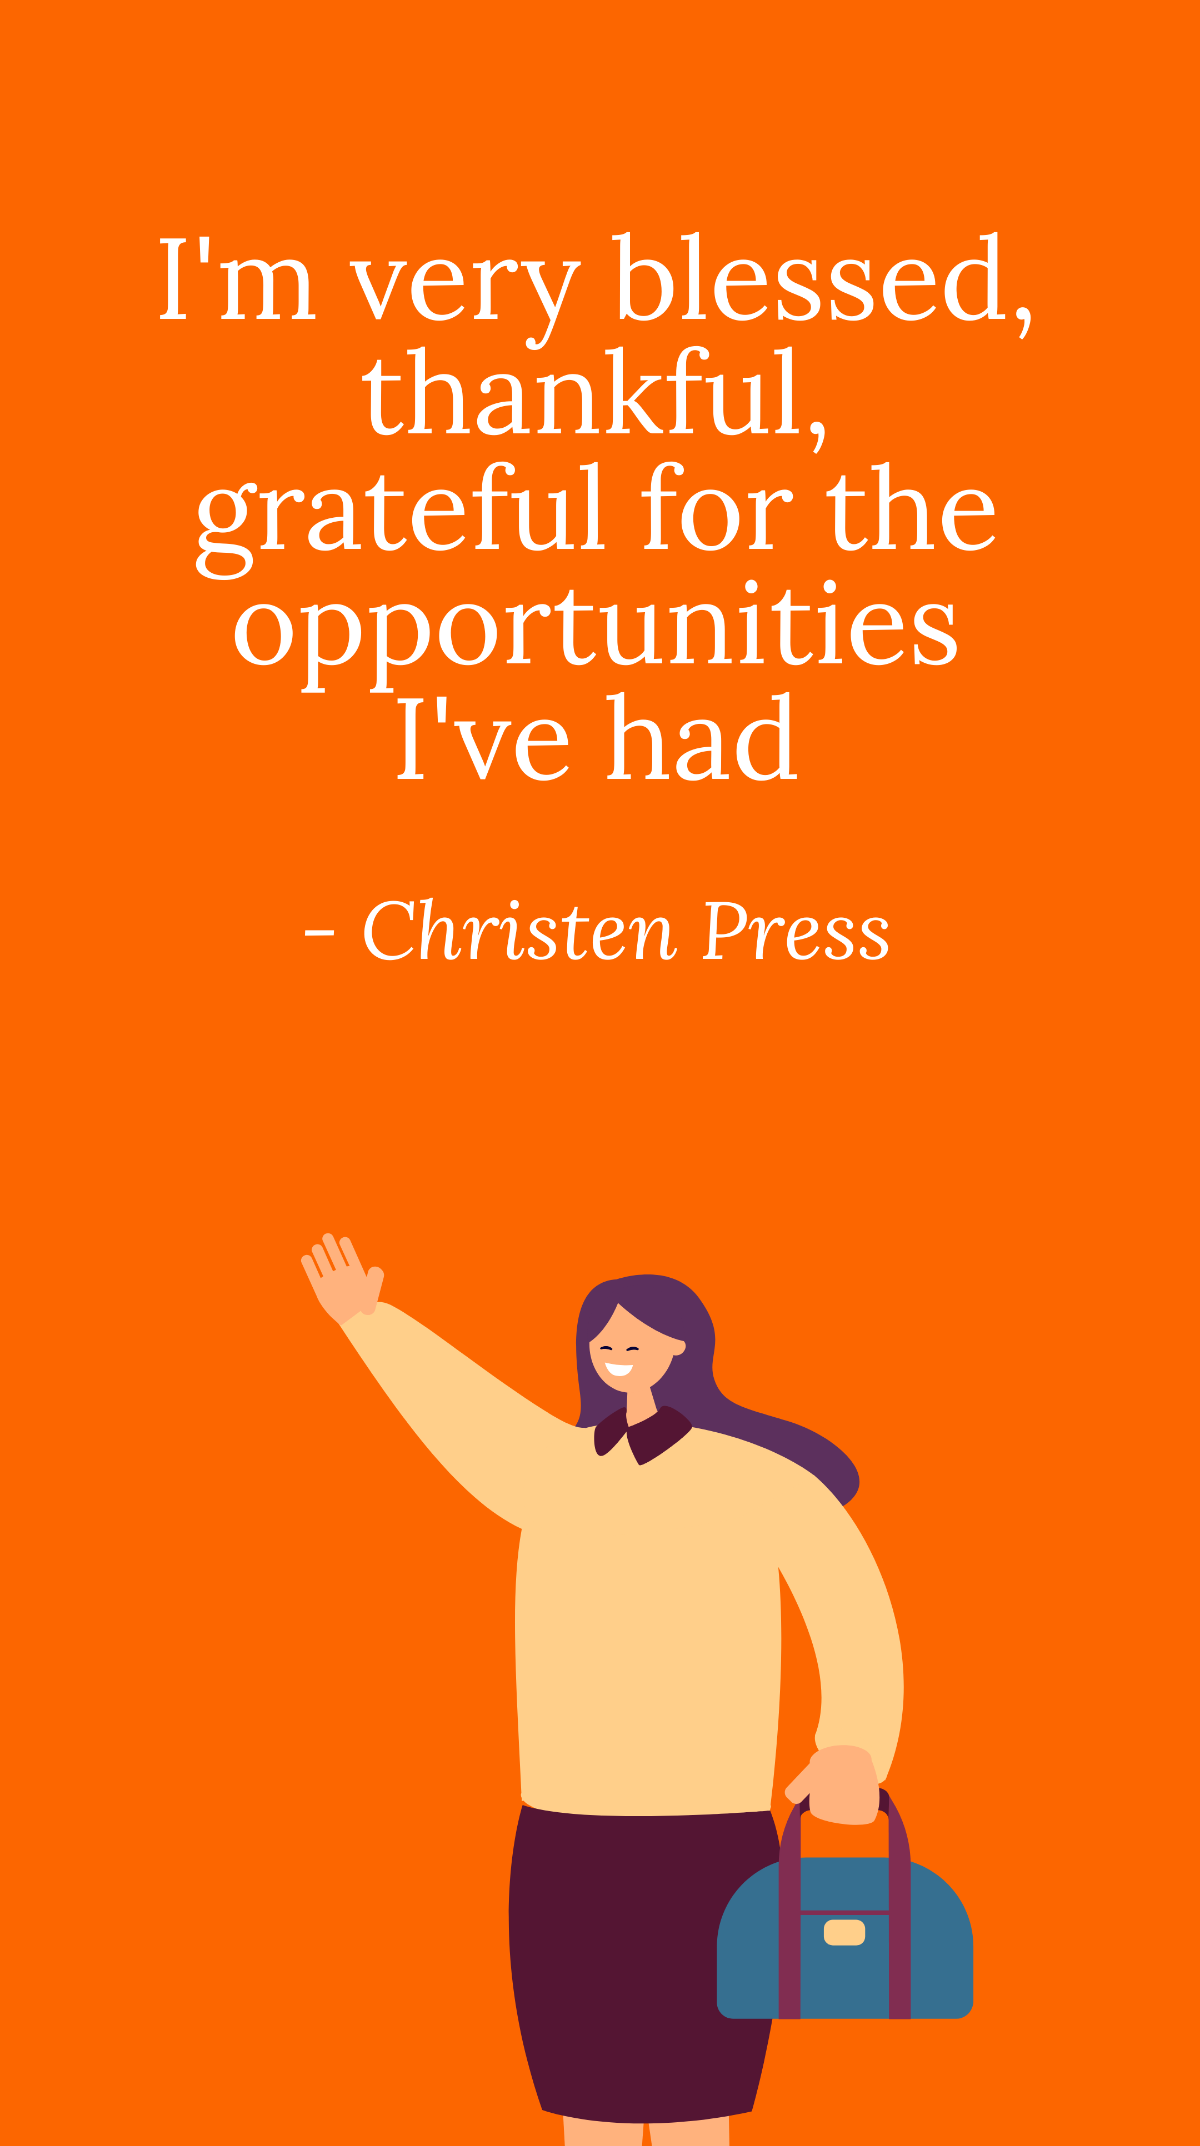 Christen Press - I'm very blessed, thankful, grateful for the opportunities I've had Template